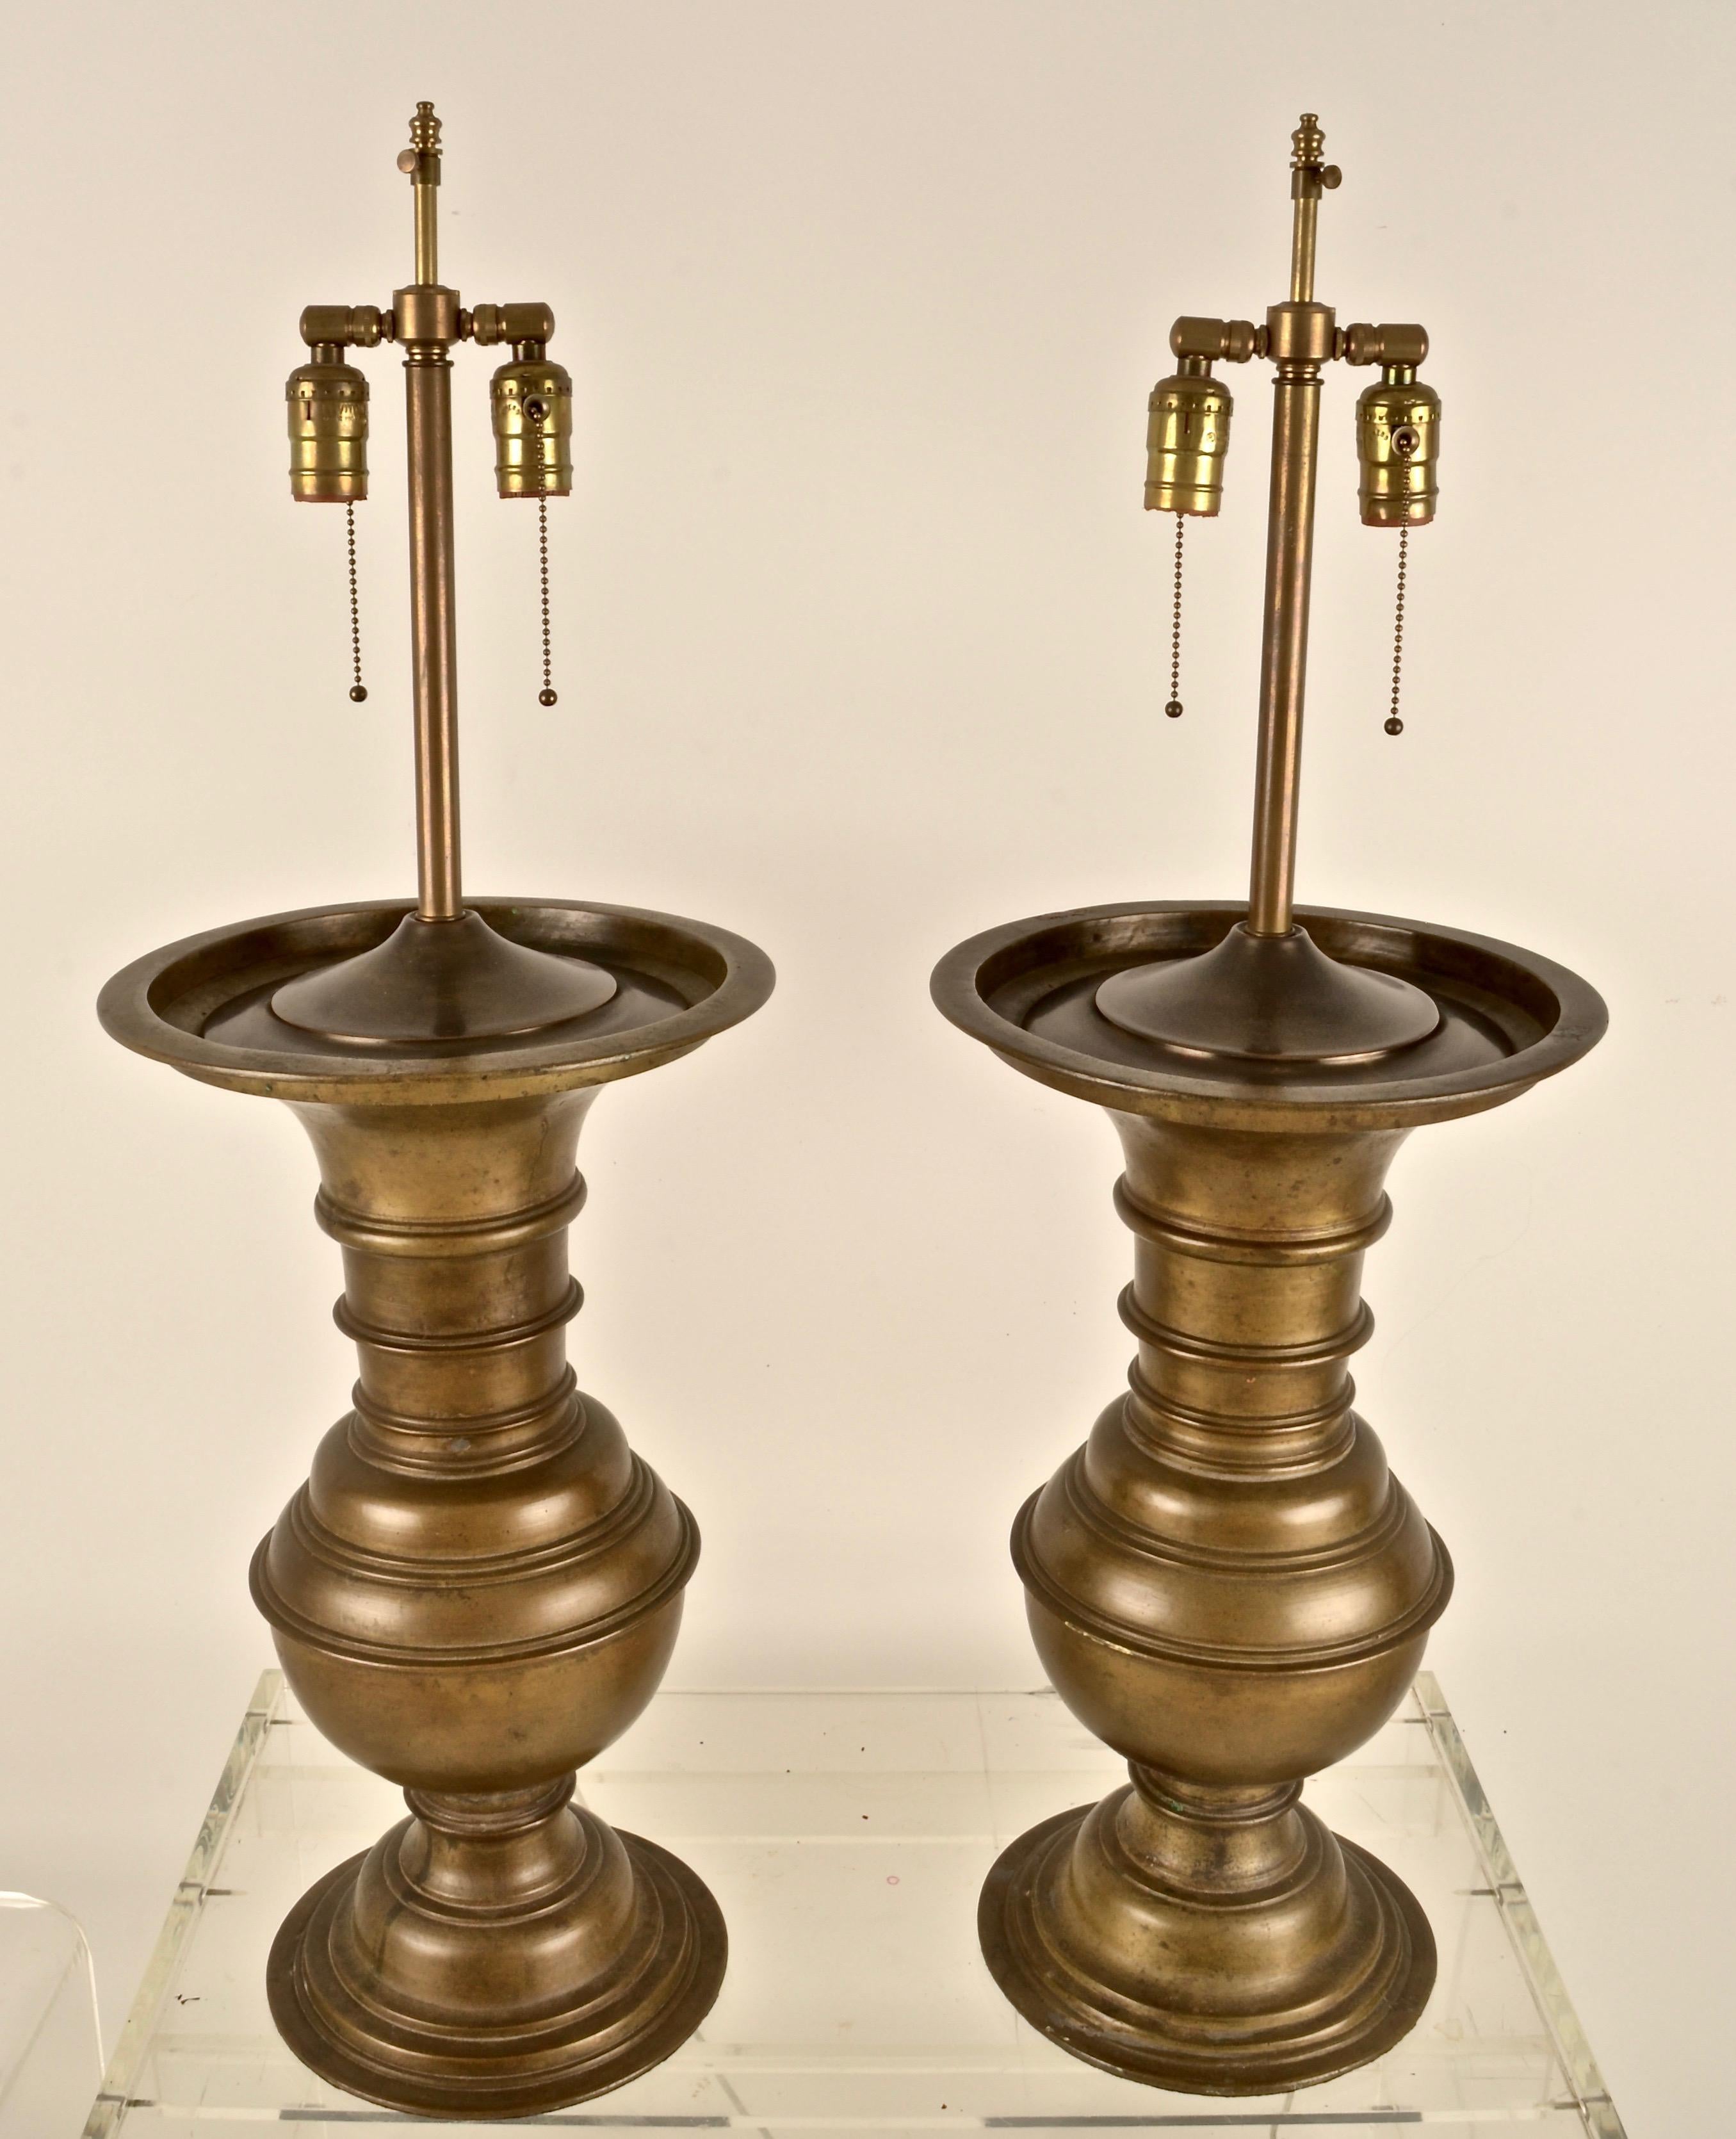 These lamps are heavy and substantial.The cast bronze has a lovely antiques patina showing natural oxidation. Quality lamp conversion features two bulbs on each lamp and adjustable shade rod. String shades in very good condition included. Lamps